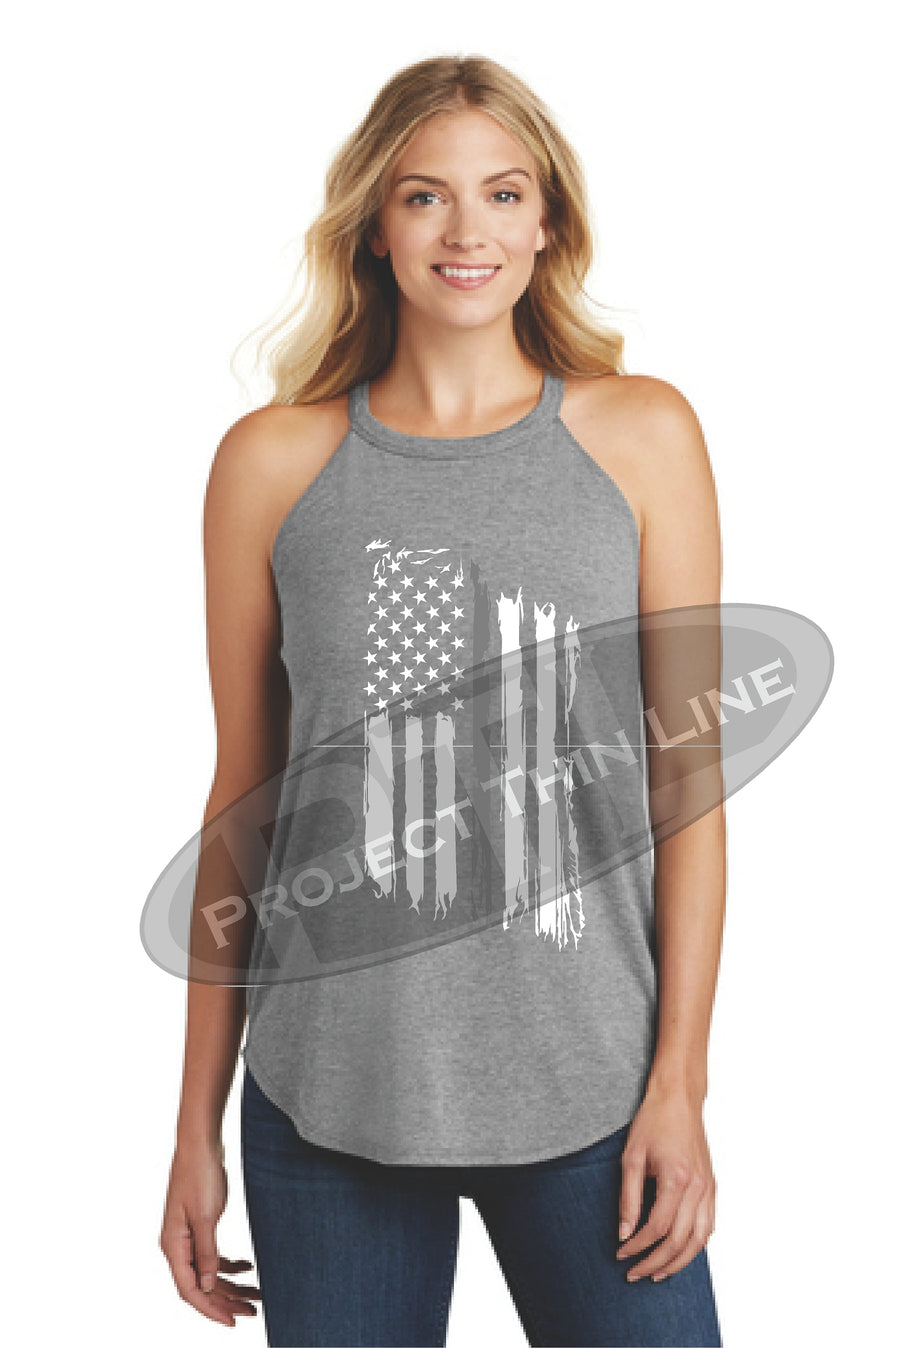 Black Tattered Thin SILVER Line American Flag Rocker Tank Top - FRONT